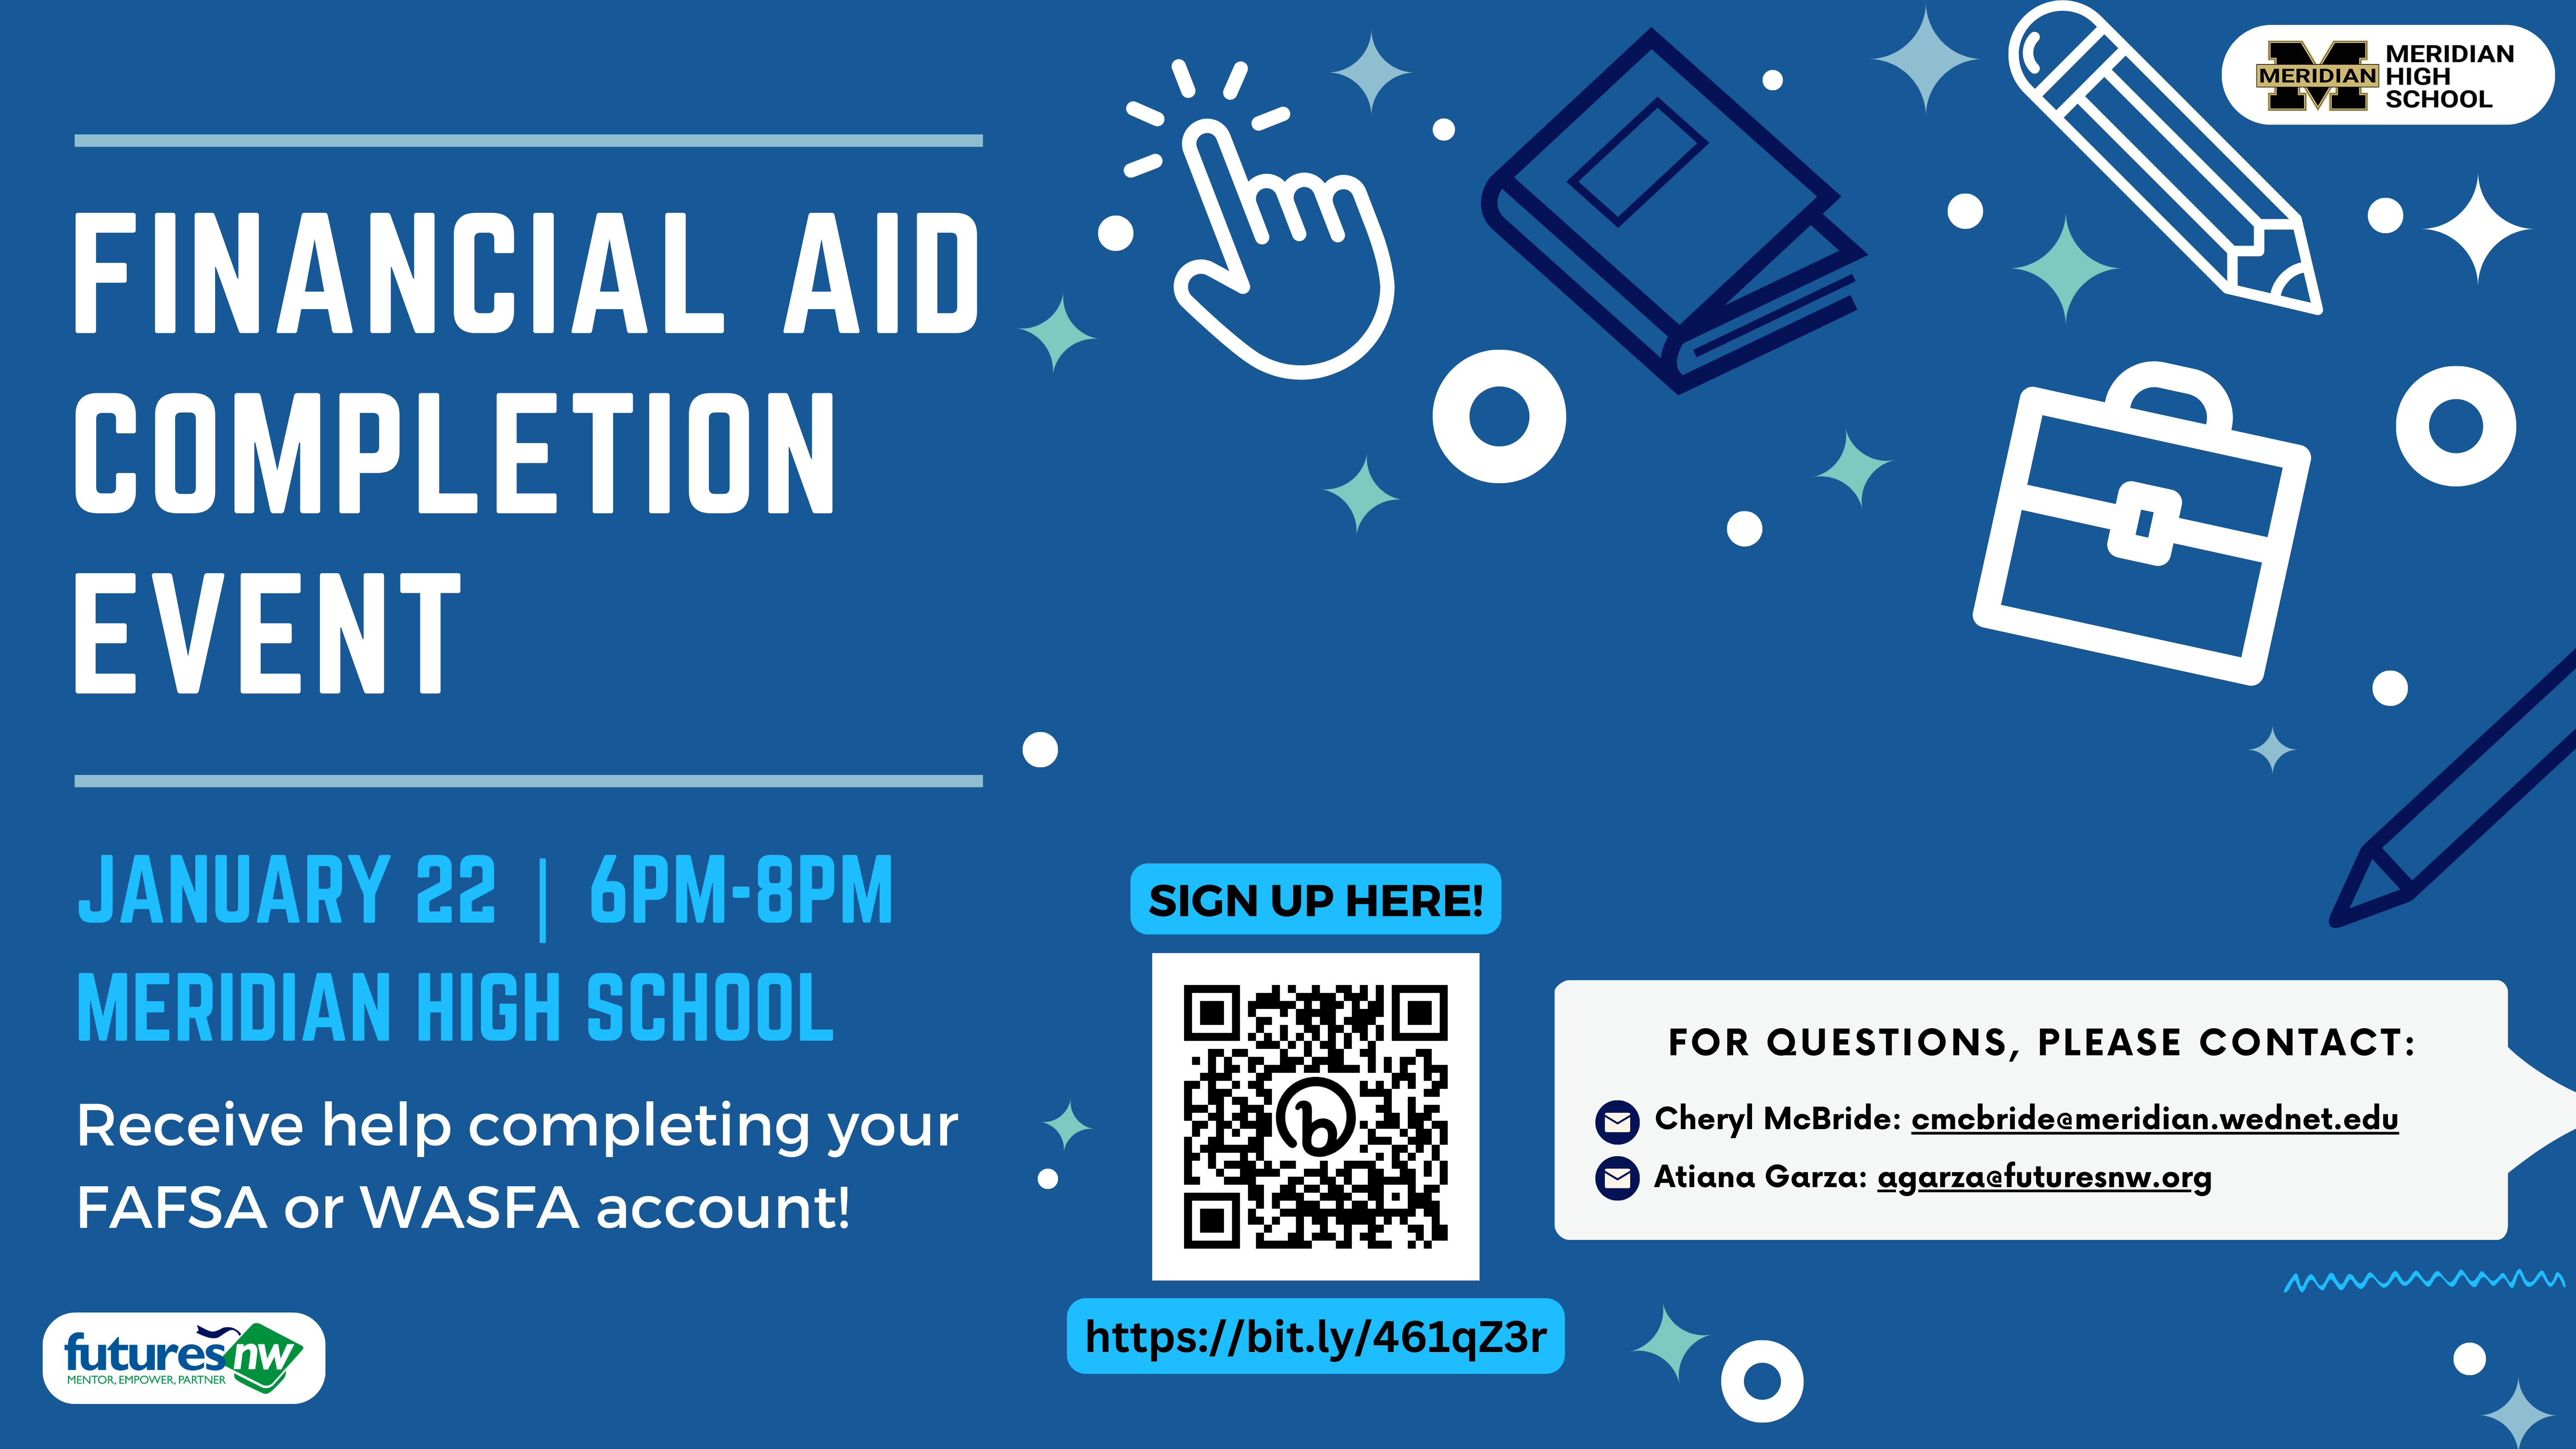 Financial aid completion event at MHS on Jan 22 at 6 pm.